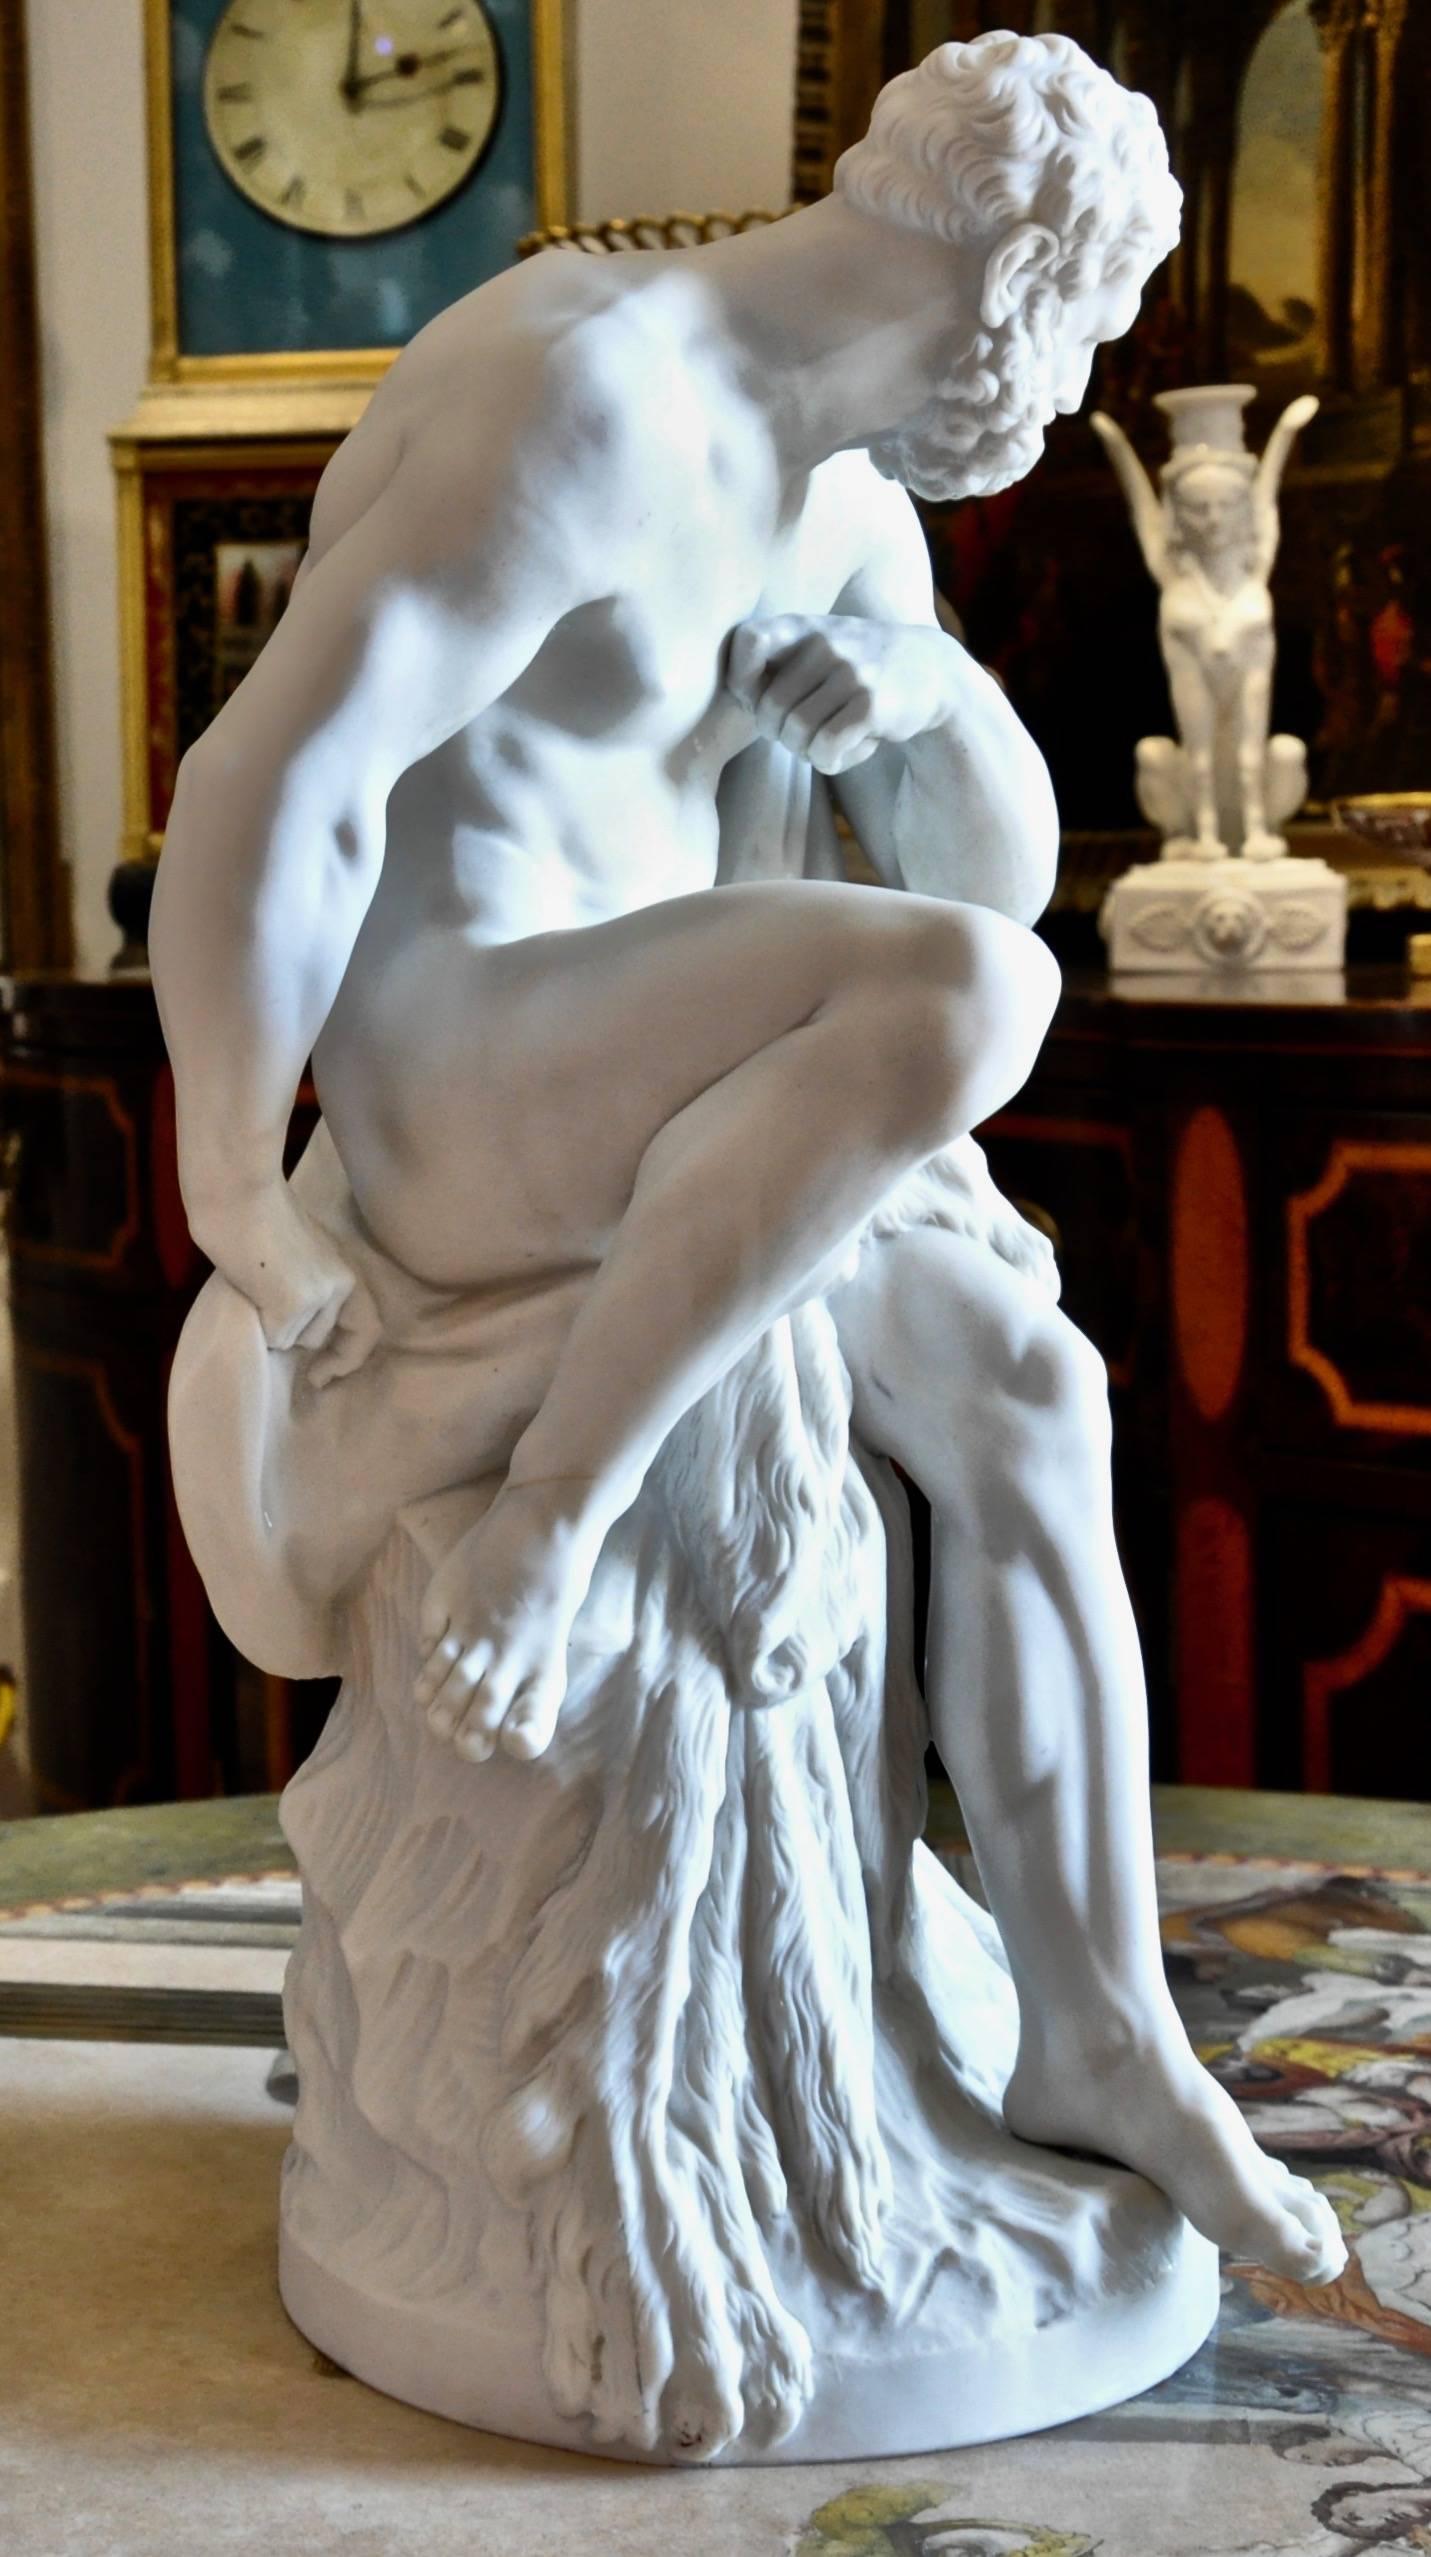 Neoclassical Large 19th Century Berlin Bisque or Parian Porcelain Figure of Hercules